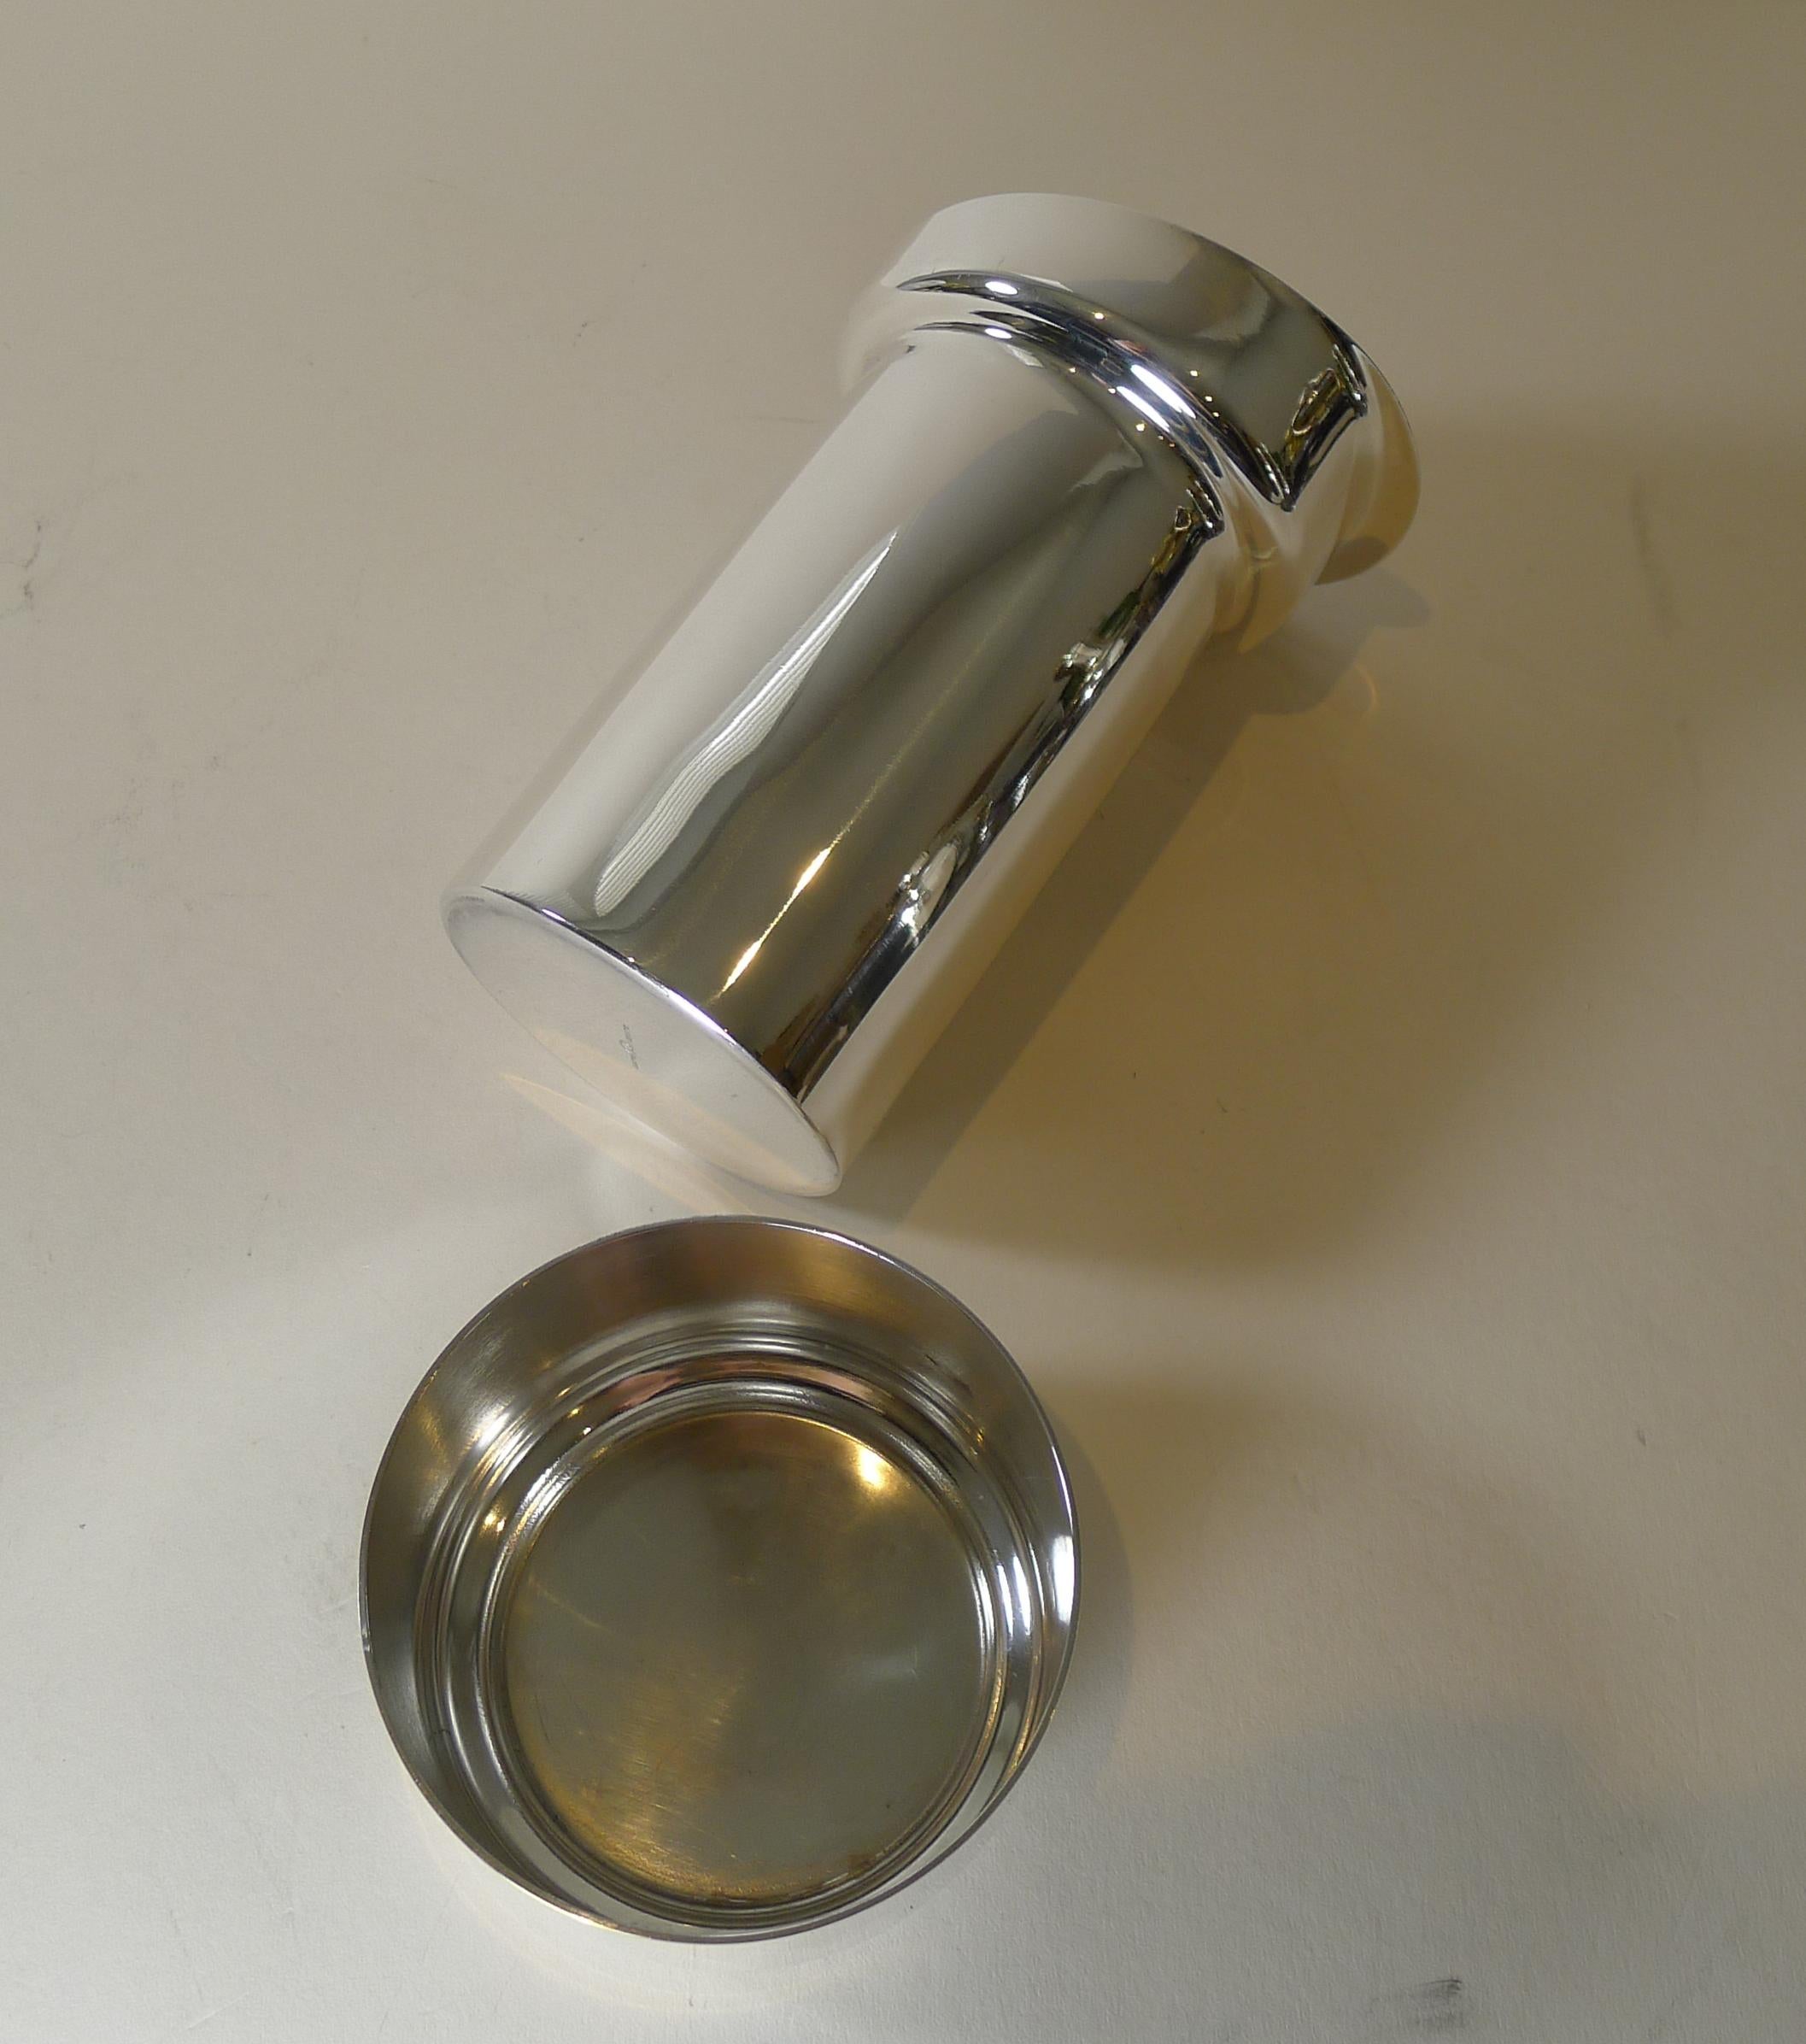 Vintage Italian Silver Plated Cocktail Shaker by Lino Sabattini, c.1960 For Sale 3